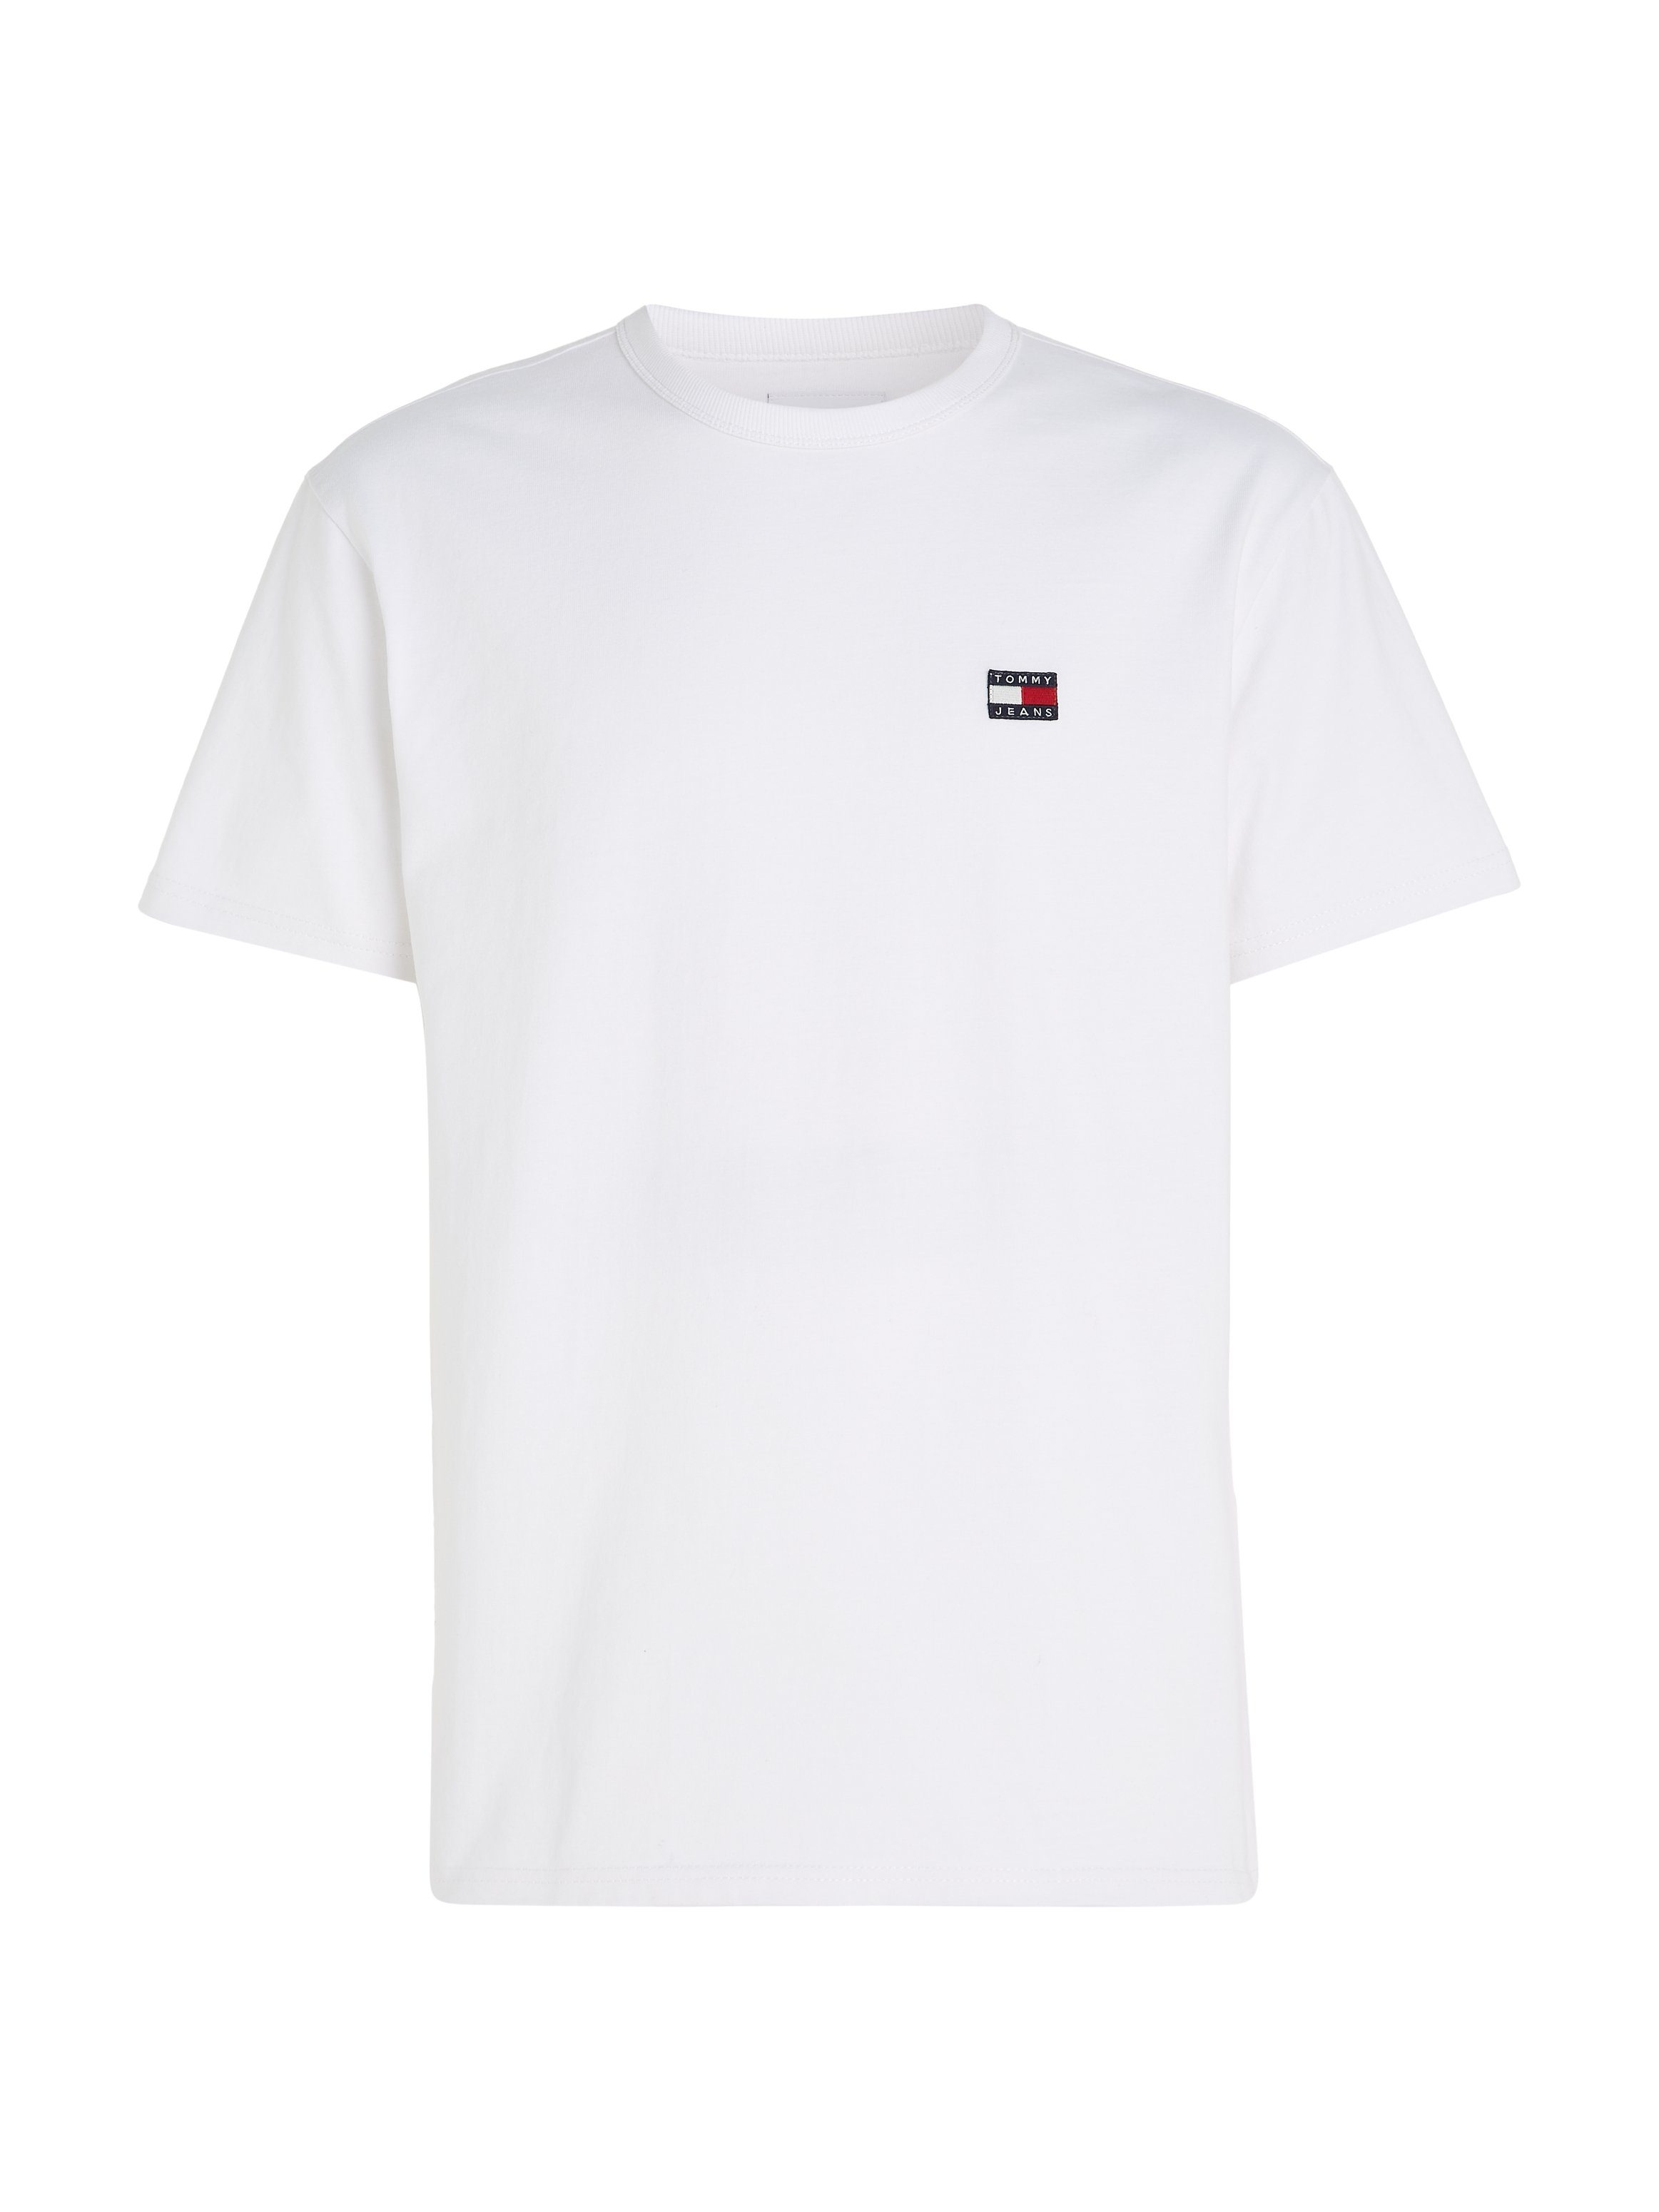 TEE TJM TOMMY T-Shirt White XS CLSC Tommy Jeans BADGE